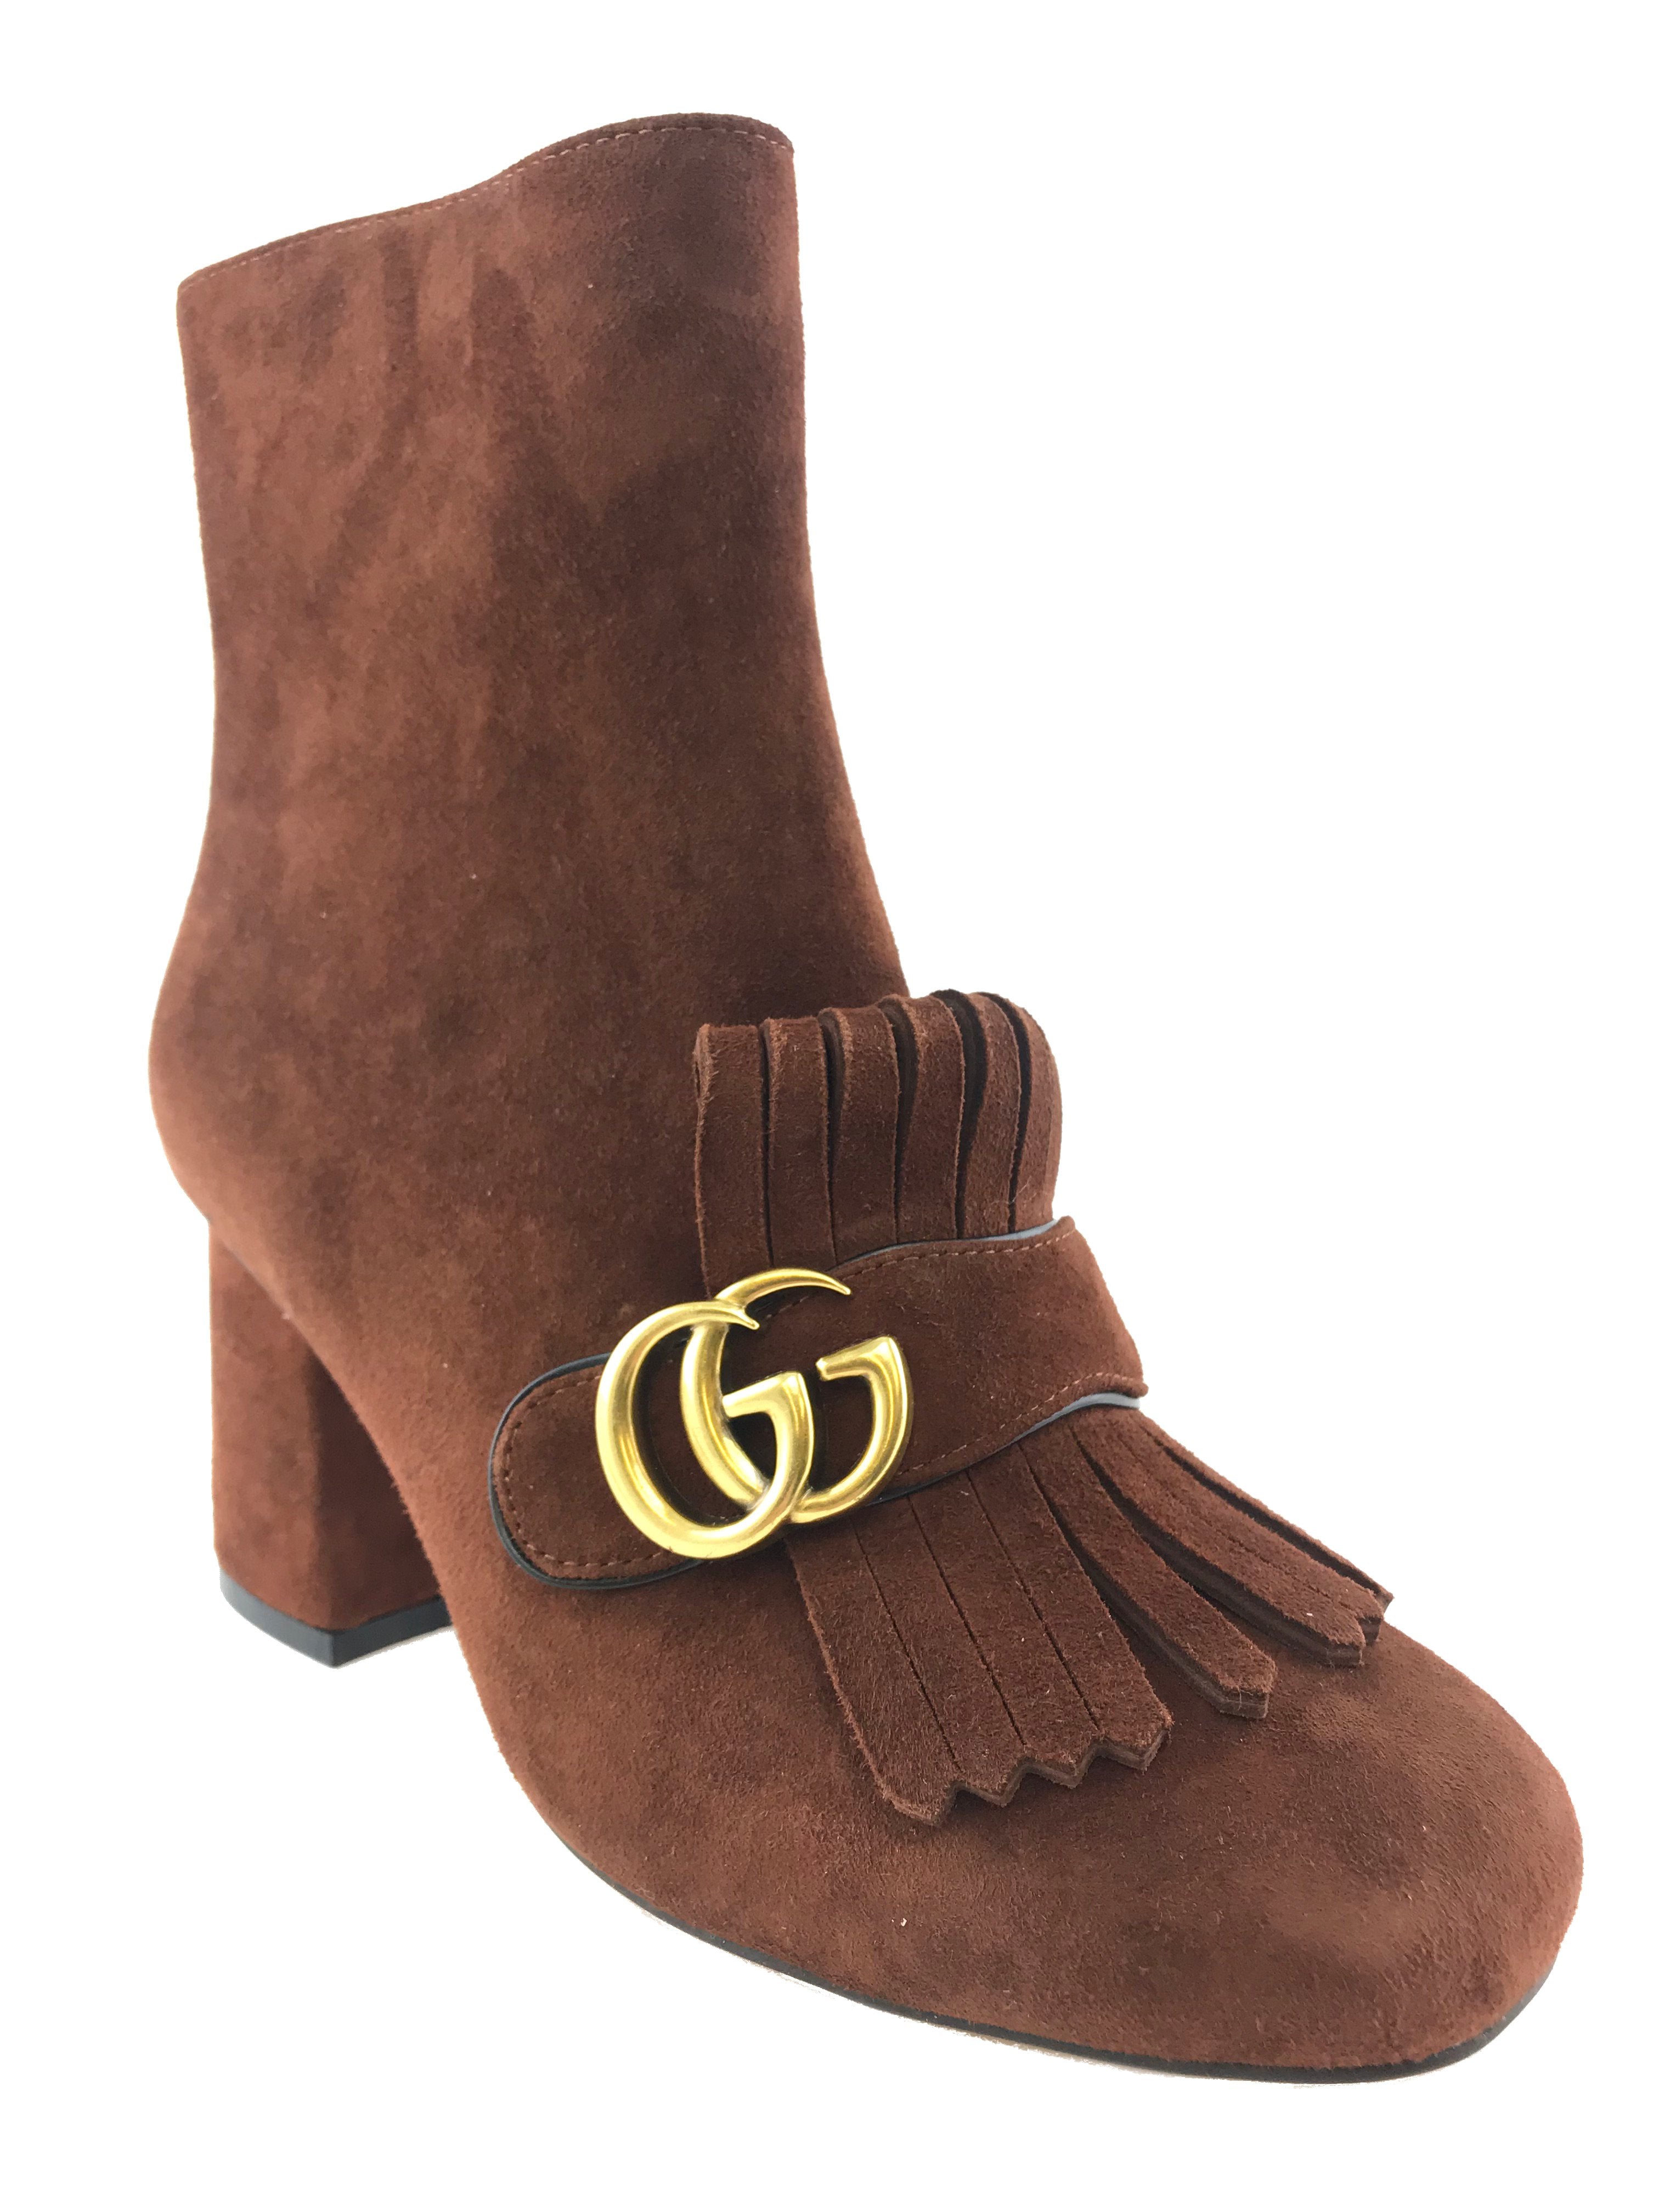 Gucci Marmont GG Suede Block-Heel Ankle Boots Size 9 - Consigned Designs